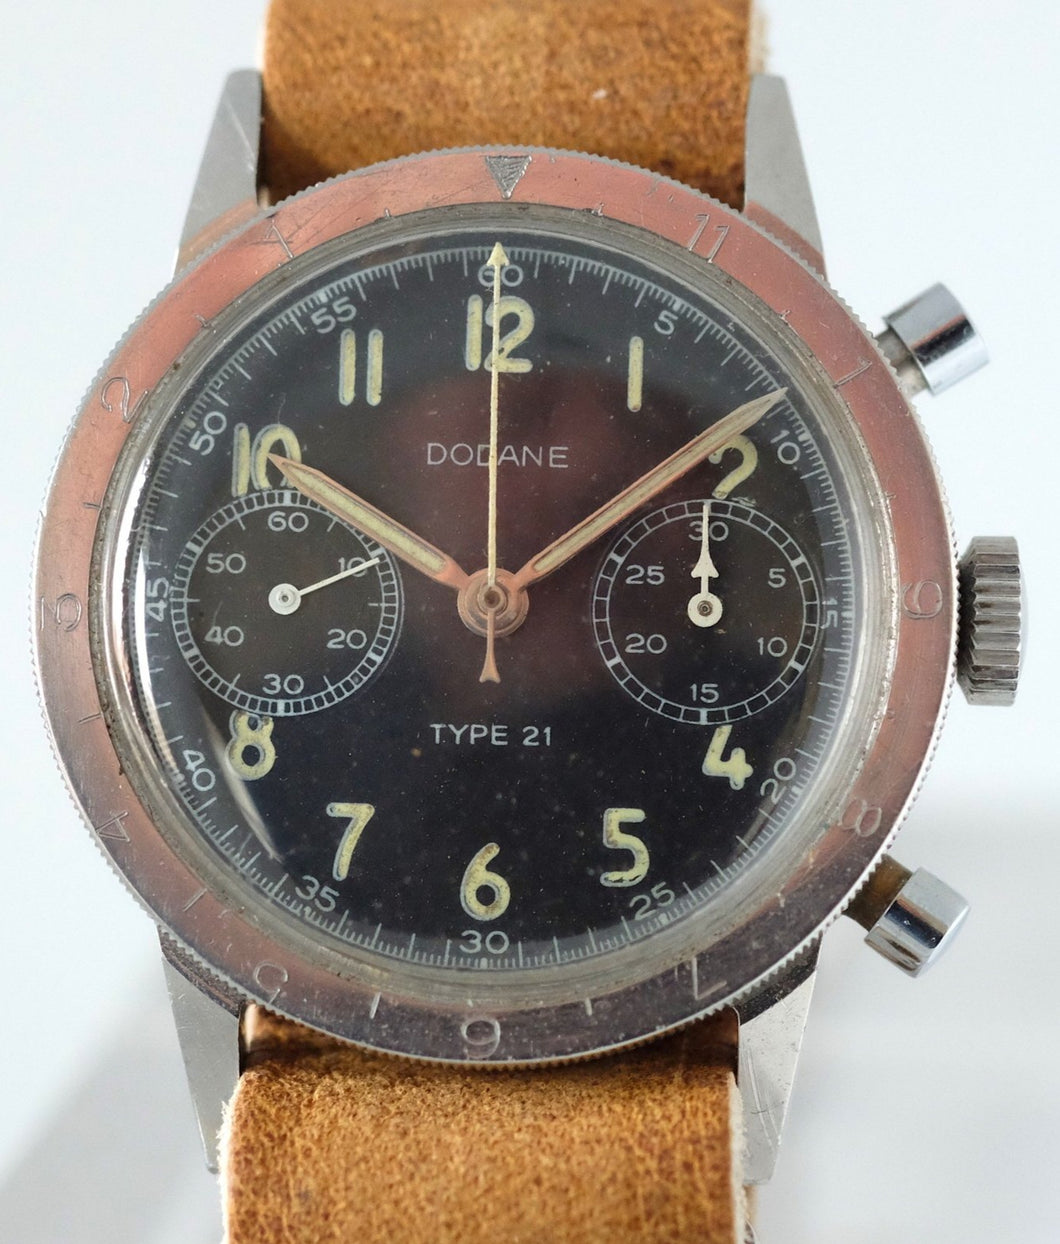 Dodane Type 21 French Military Issued Chronograph